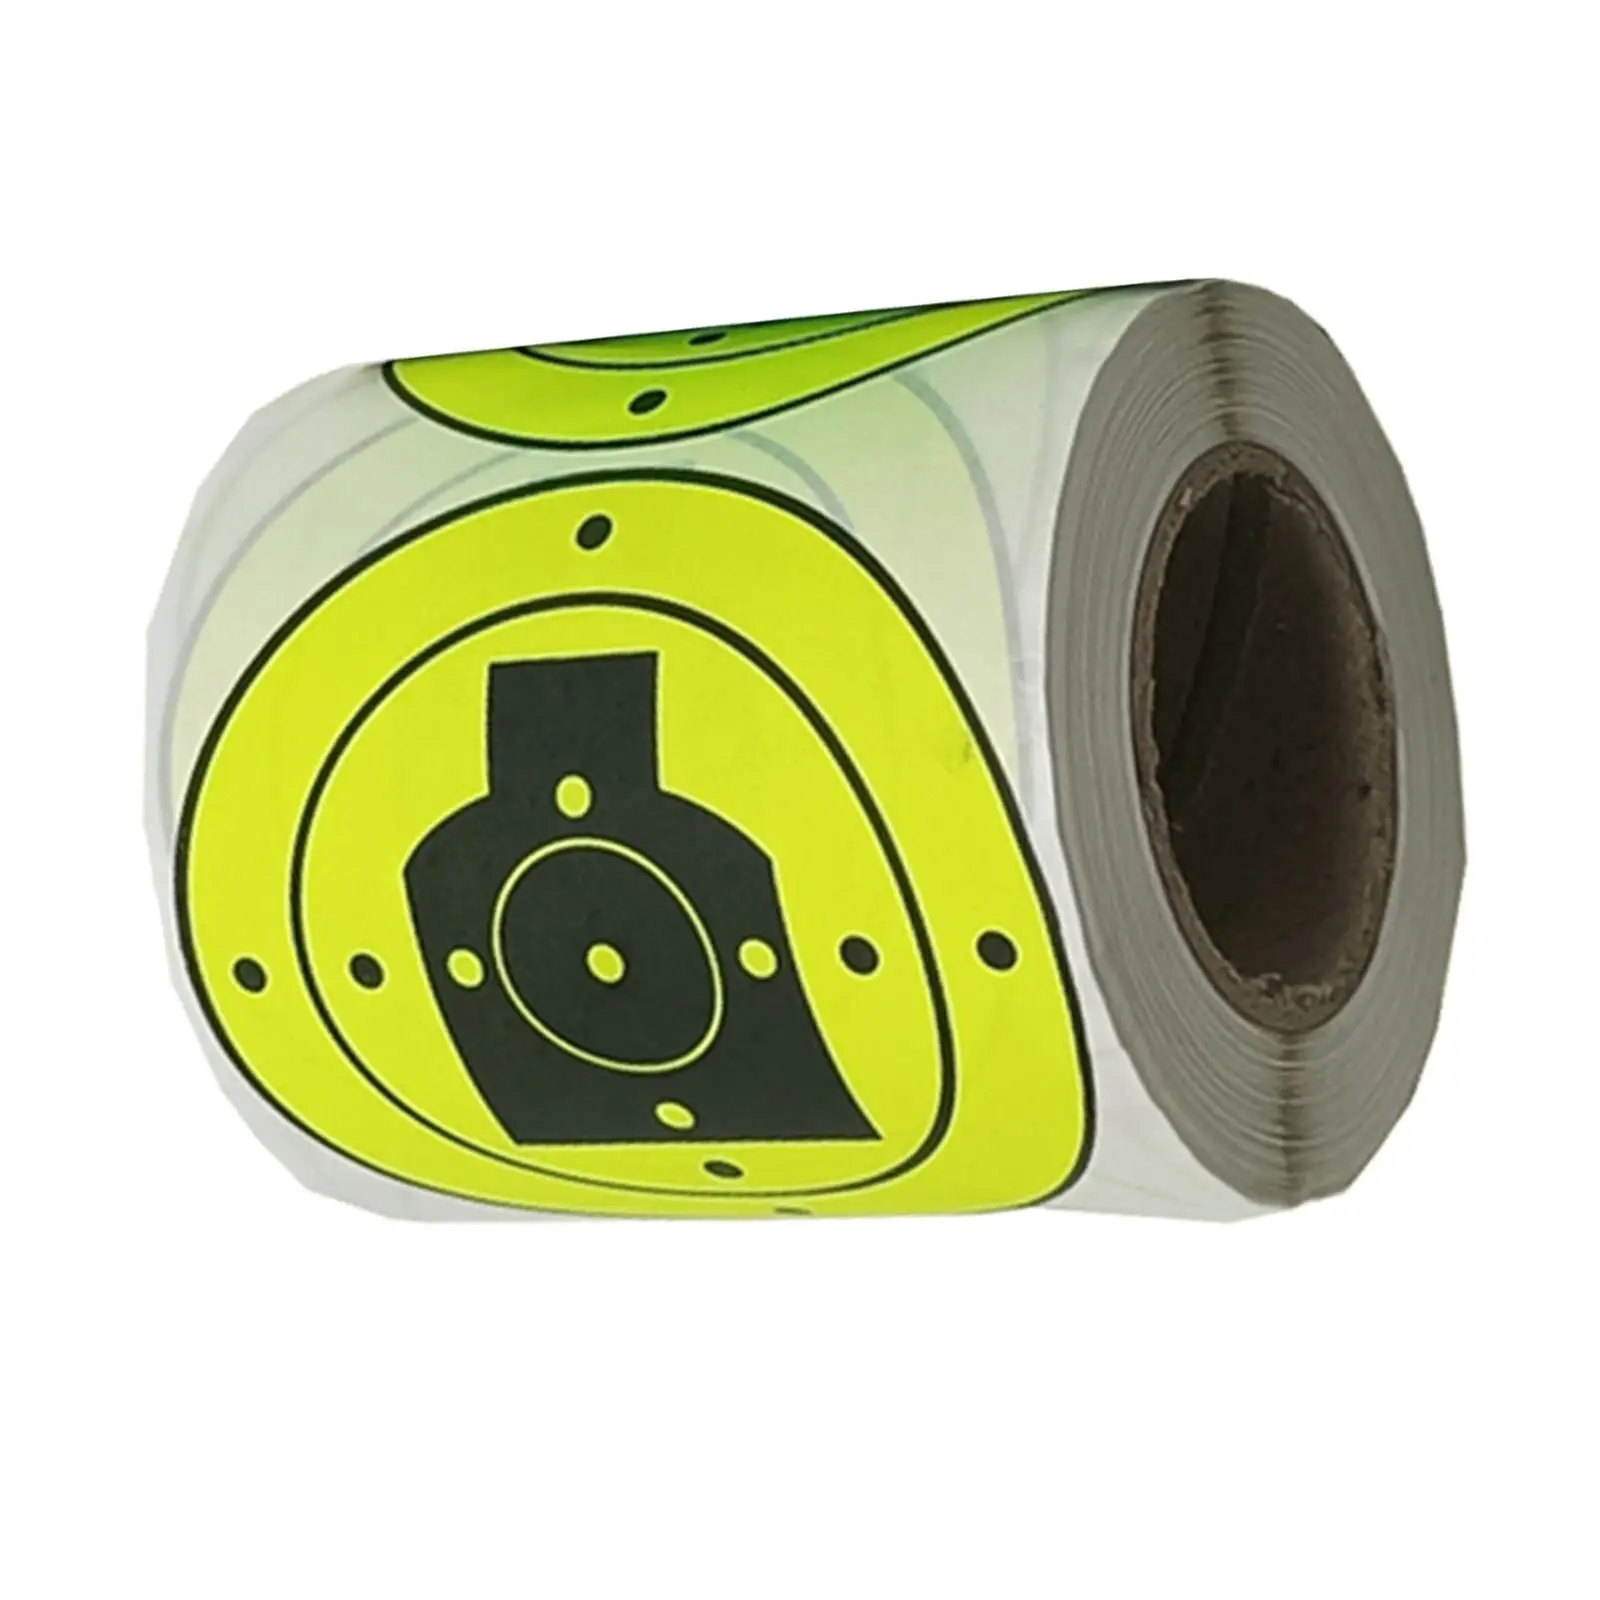 200PCS Round Shooting Targets, Hunting Targets Accessories, 3inch Shooting Exercise Self Adhesive Targets Stickers